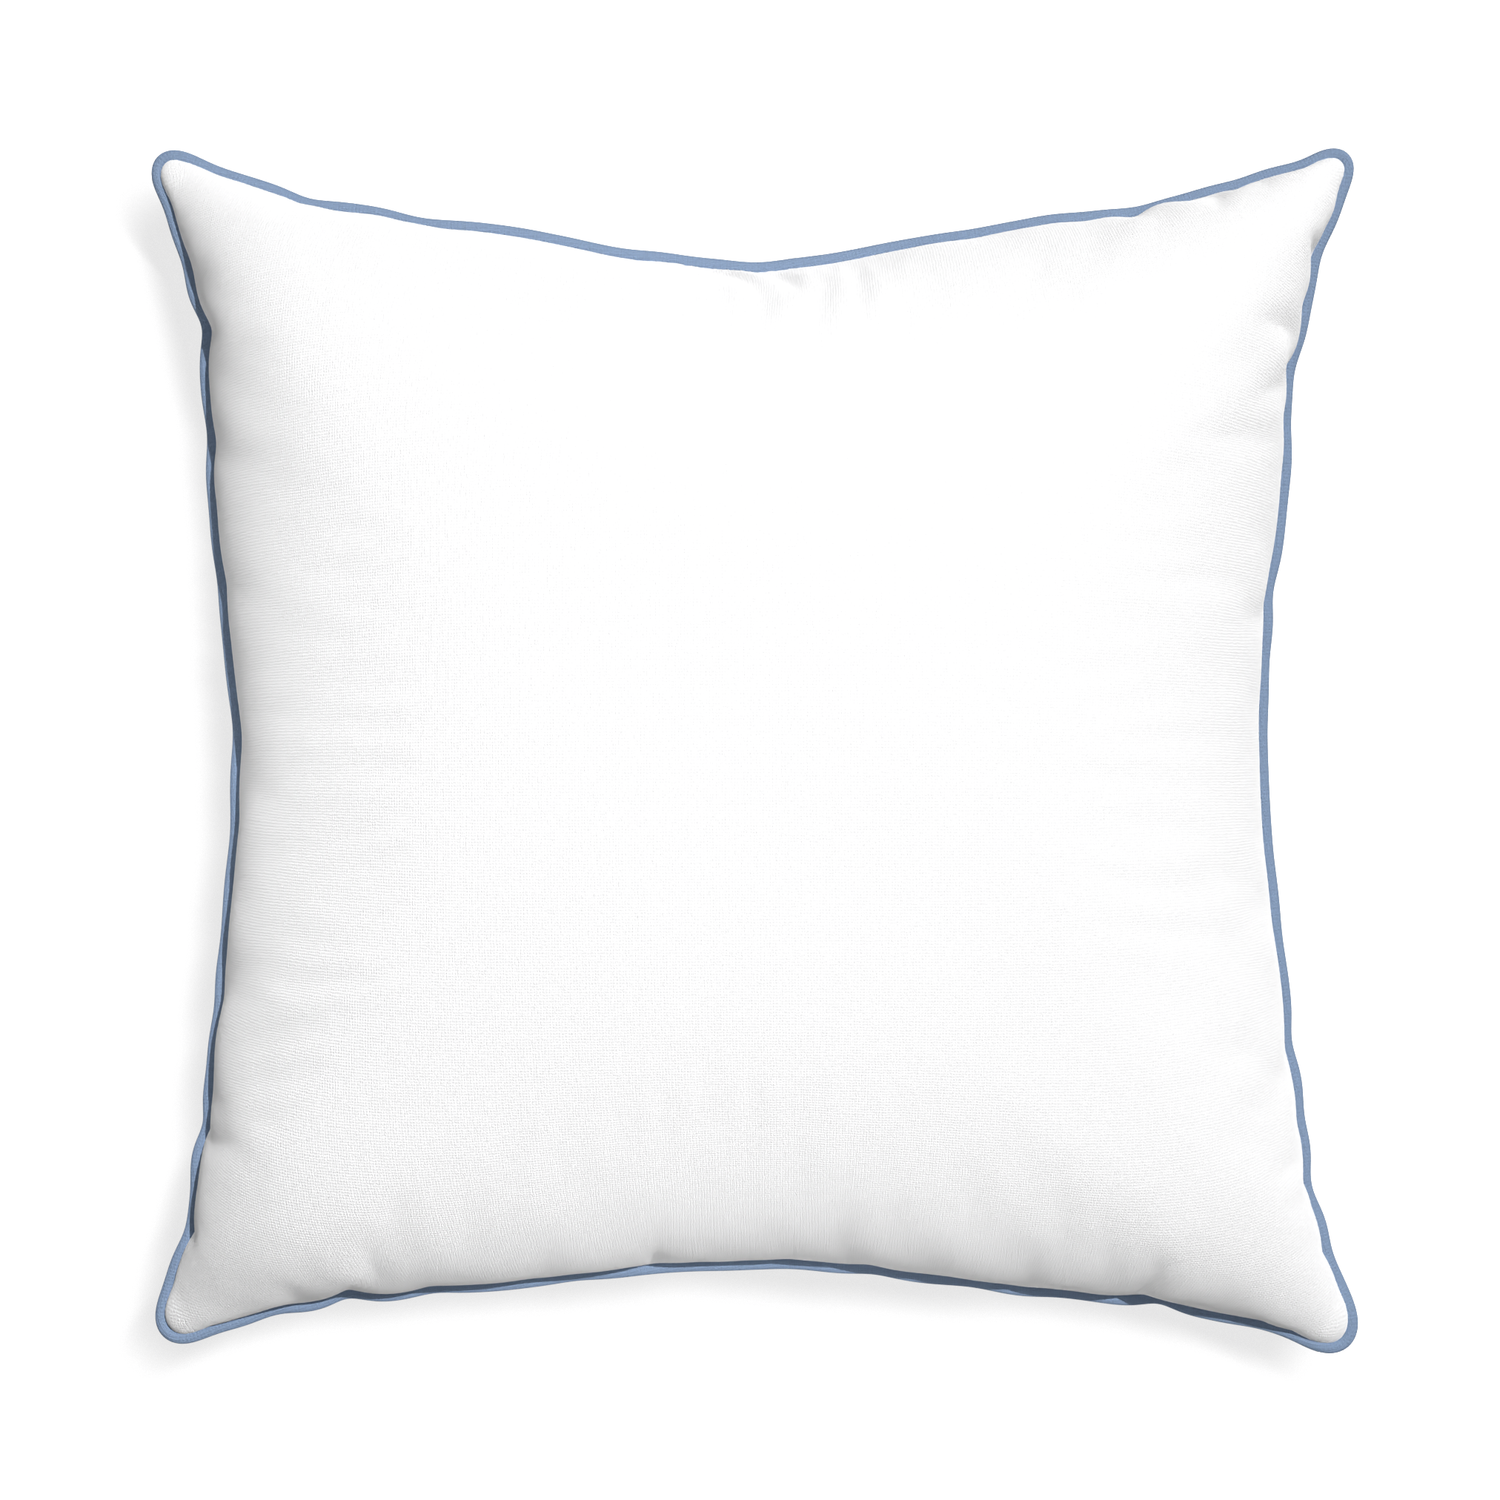 Euro-sham snow custom pillow with sky piping on white background